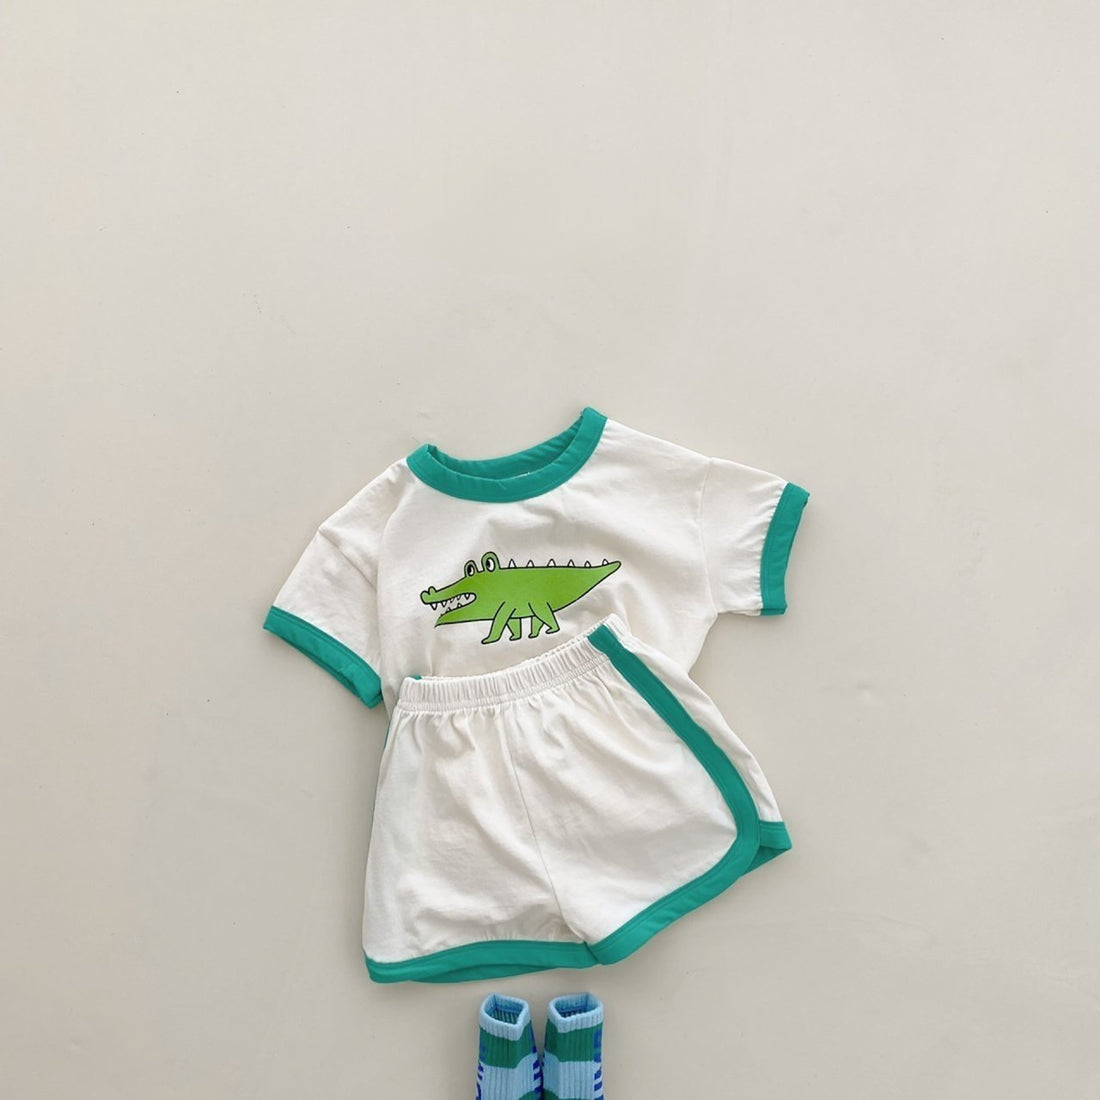 CROC SET🐊 - Adorable Summer Outfit for Kids